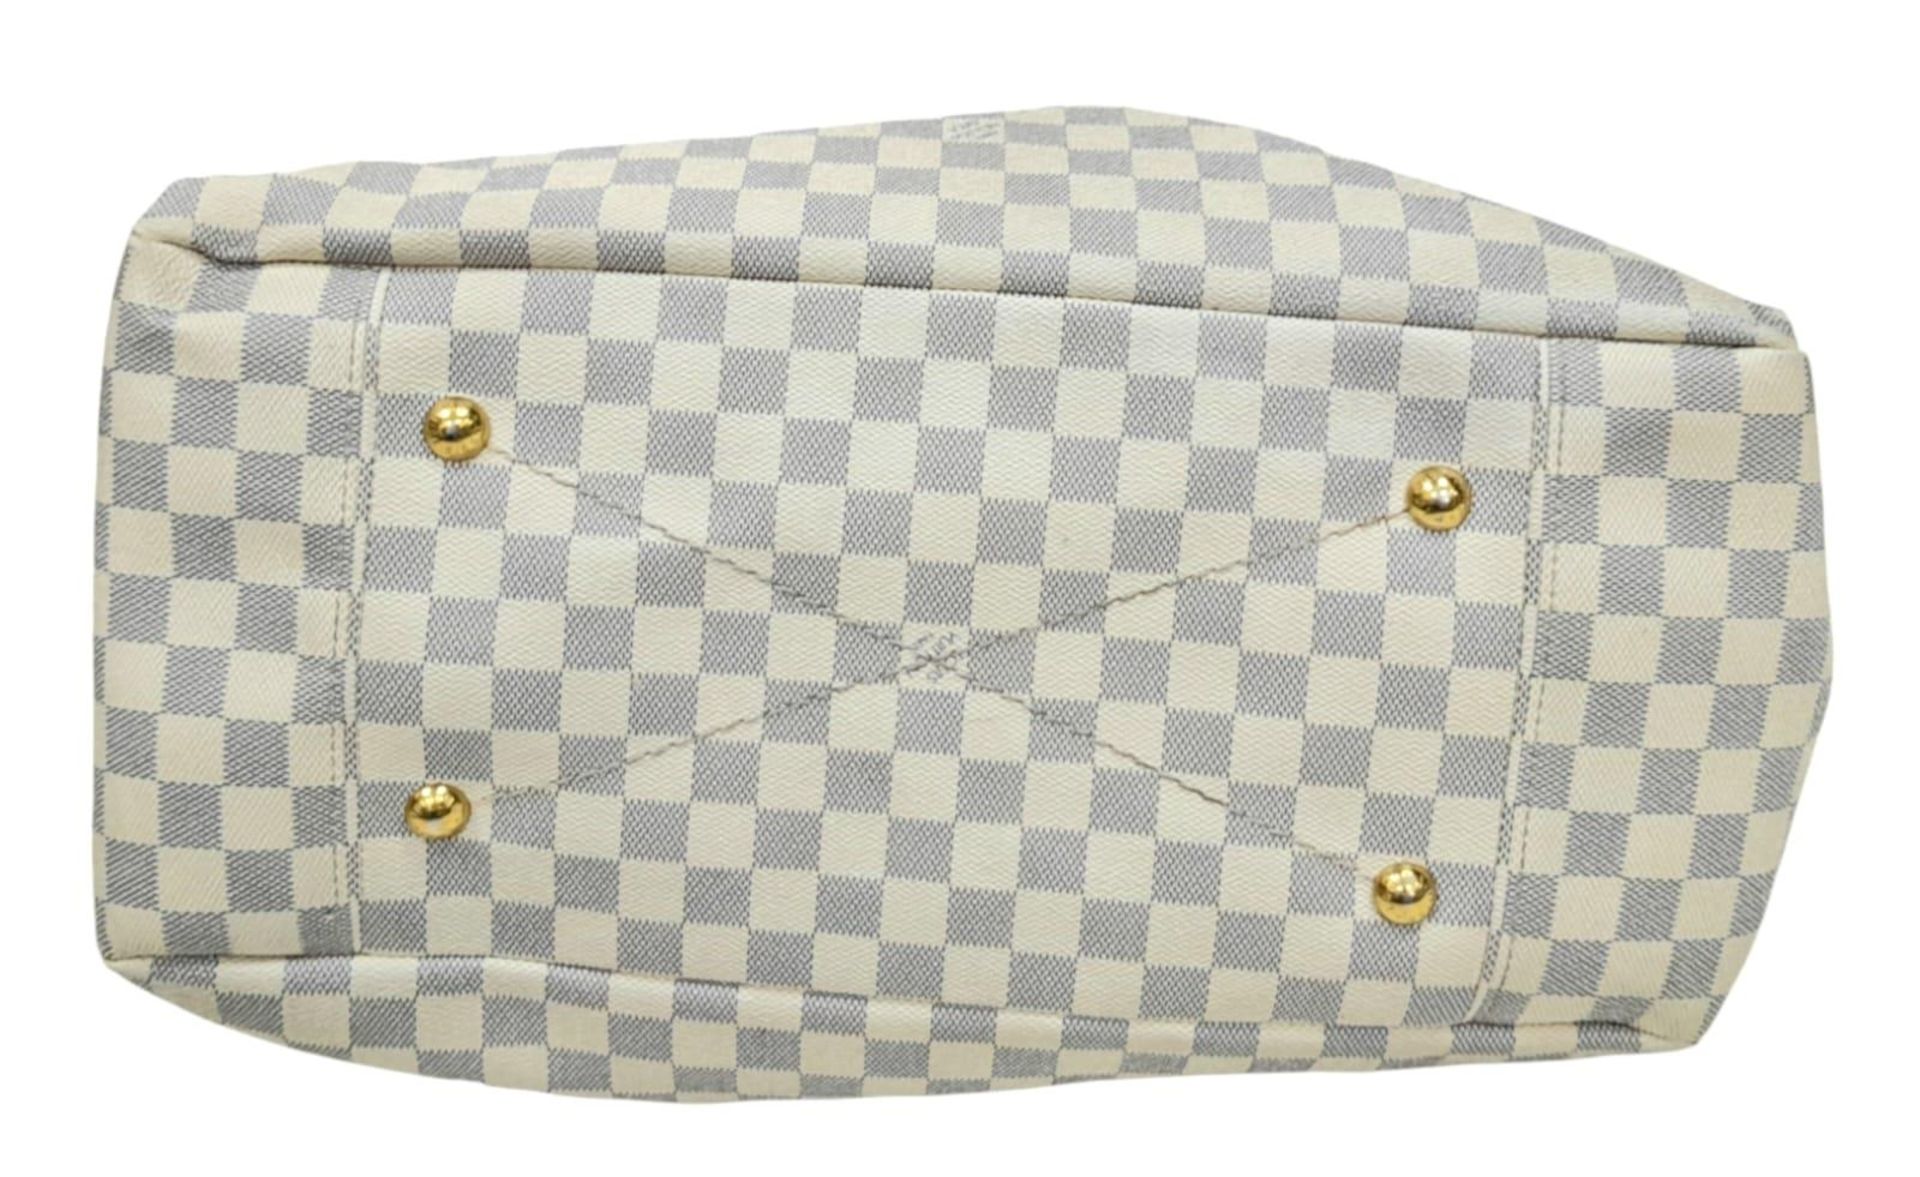 A Louis Vuitton Artsy Damier Azur Canvas Bag. Leather Exterior with Gold-tone Hardware, Short - Image 4 of 7